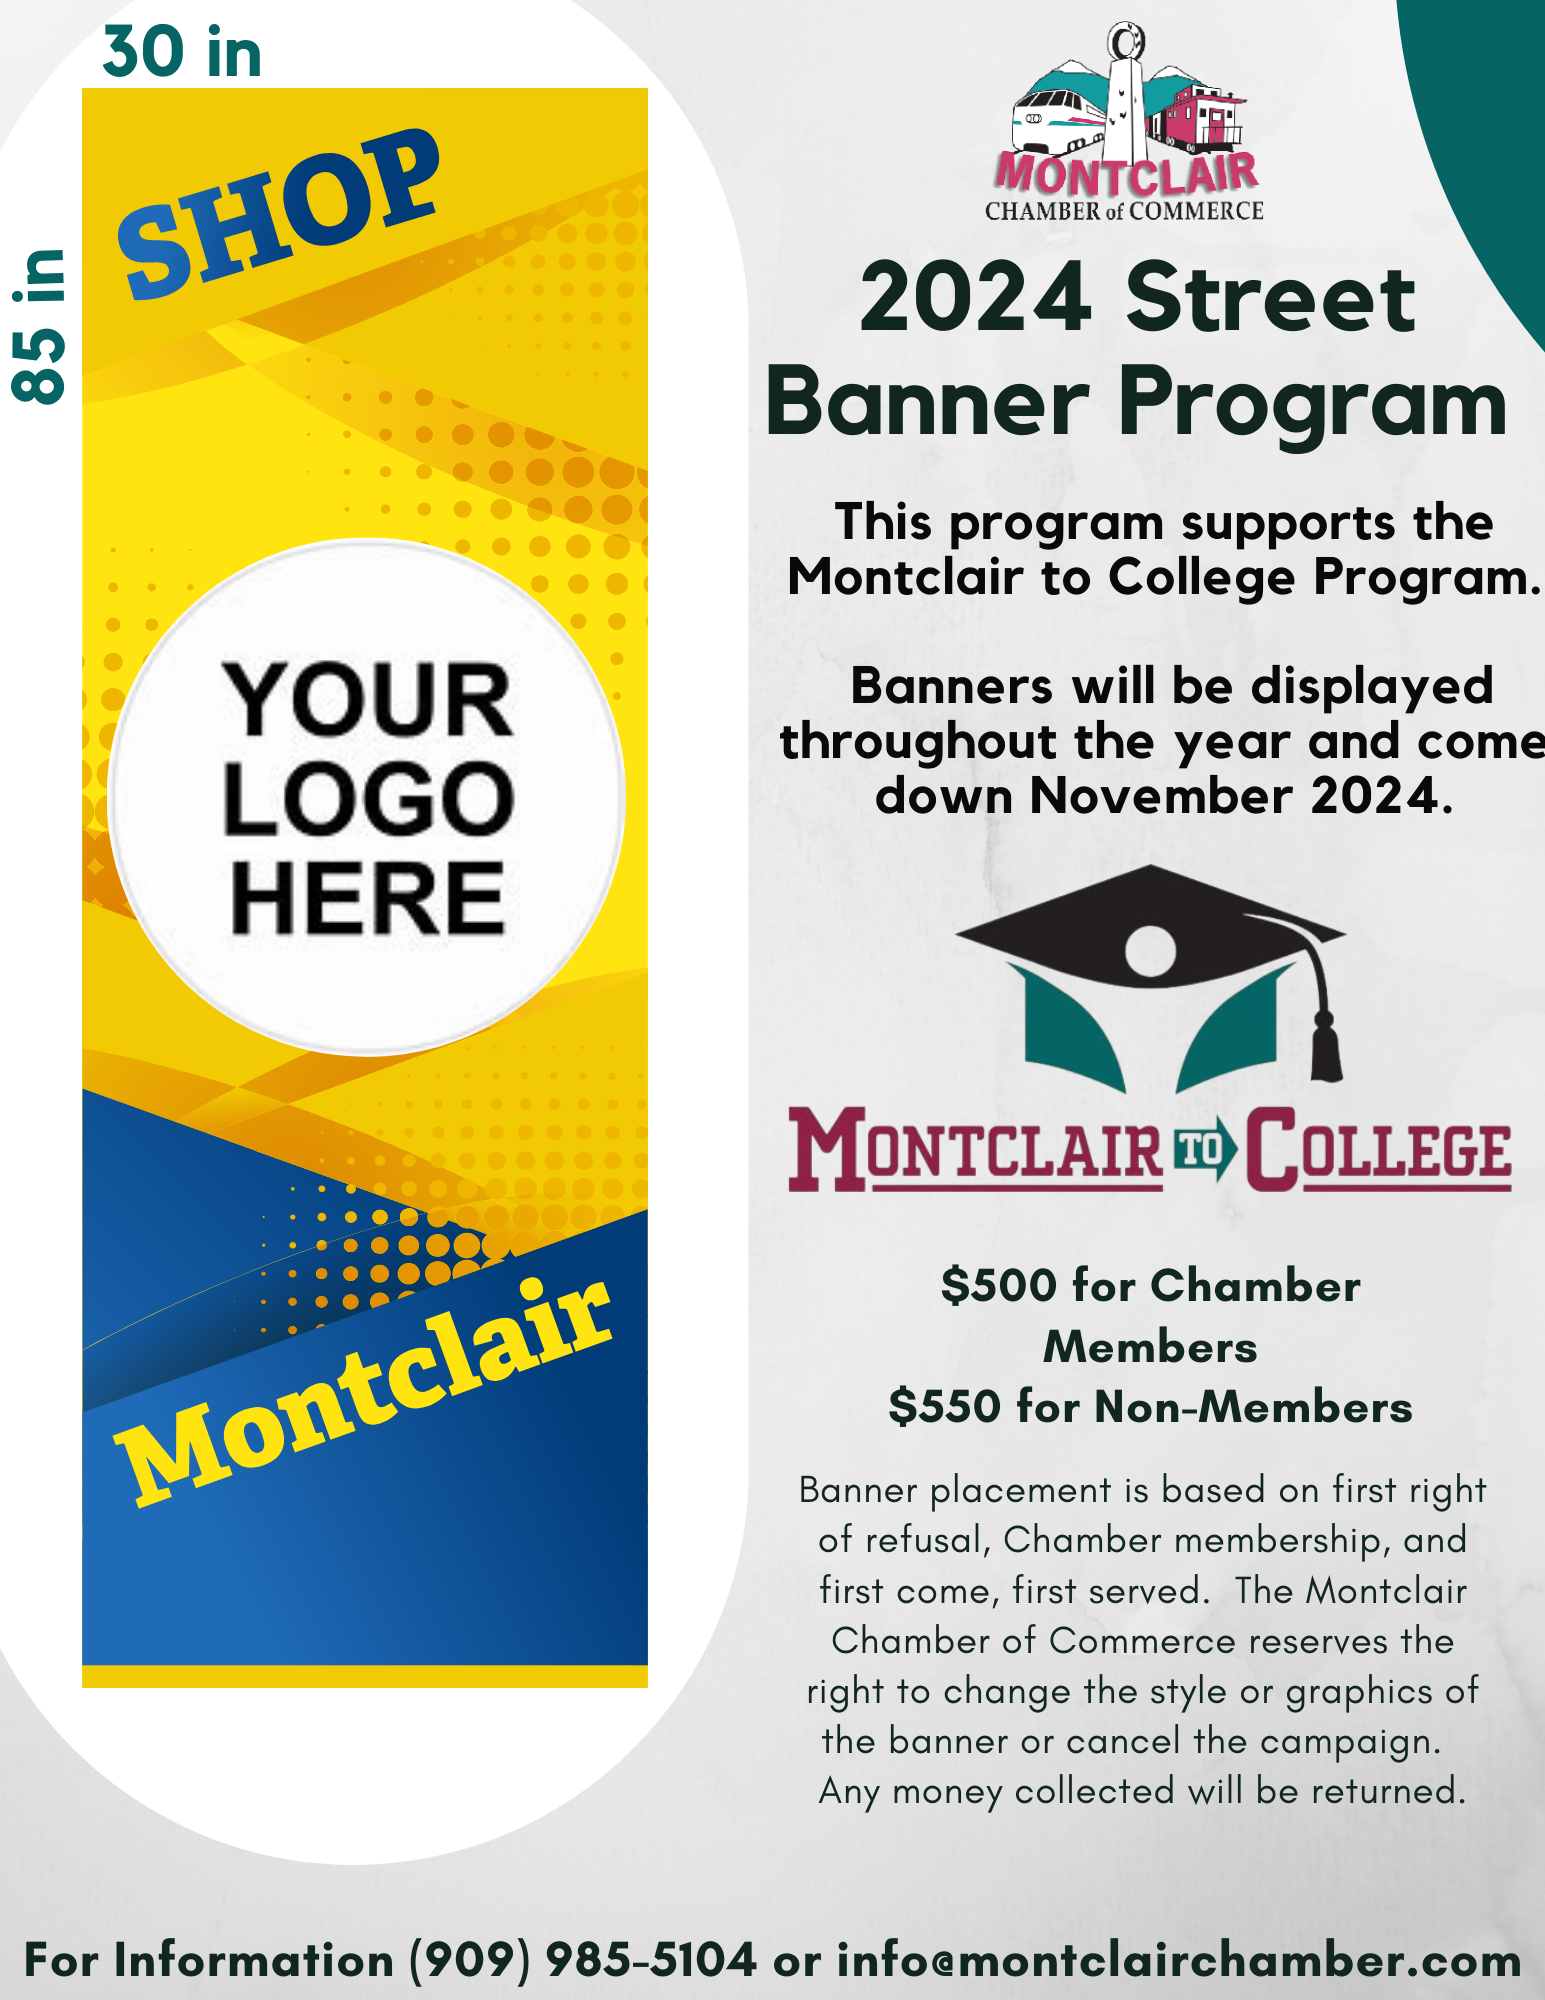 2024 Street Banner Program - supporting the Montclair to College Program. $500 for Chamber Members, $550 for non-members. More information: (909) 985-5104 or info@montclairchamber